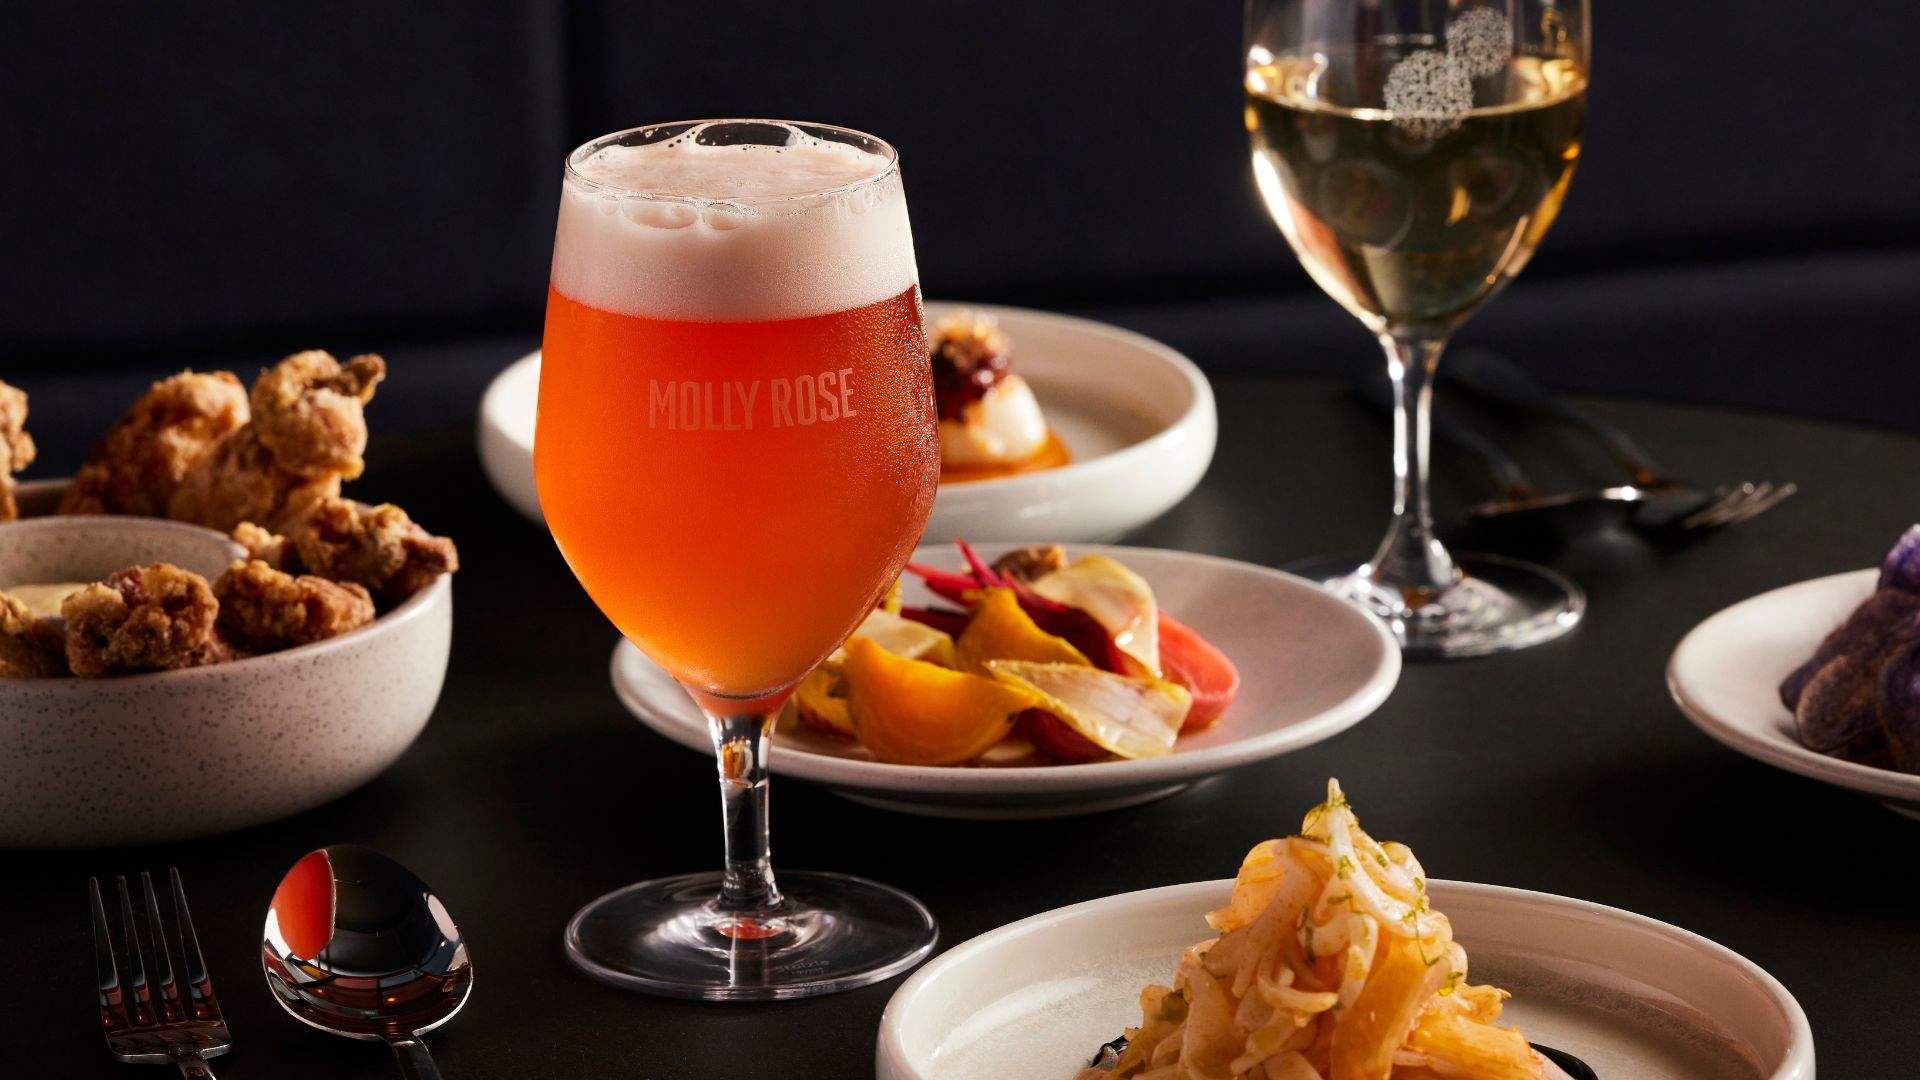 Now Open: Collingwood Brewery Molly Rose Has Officially Unveiled Its New Expansion